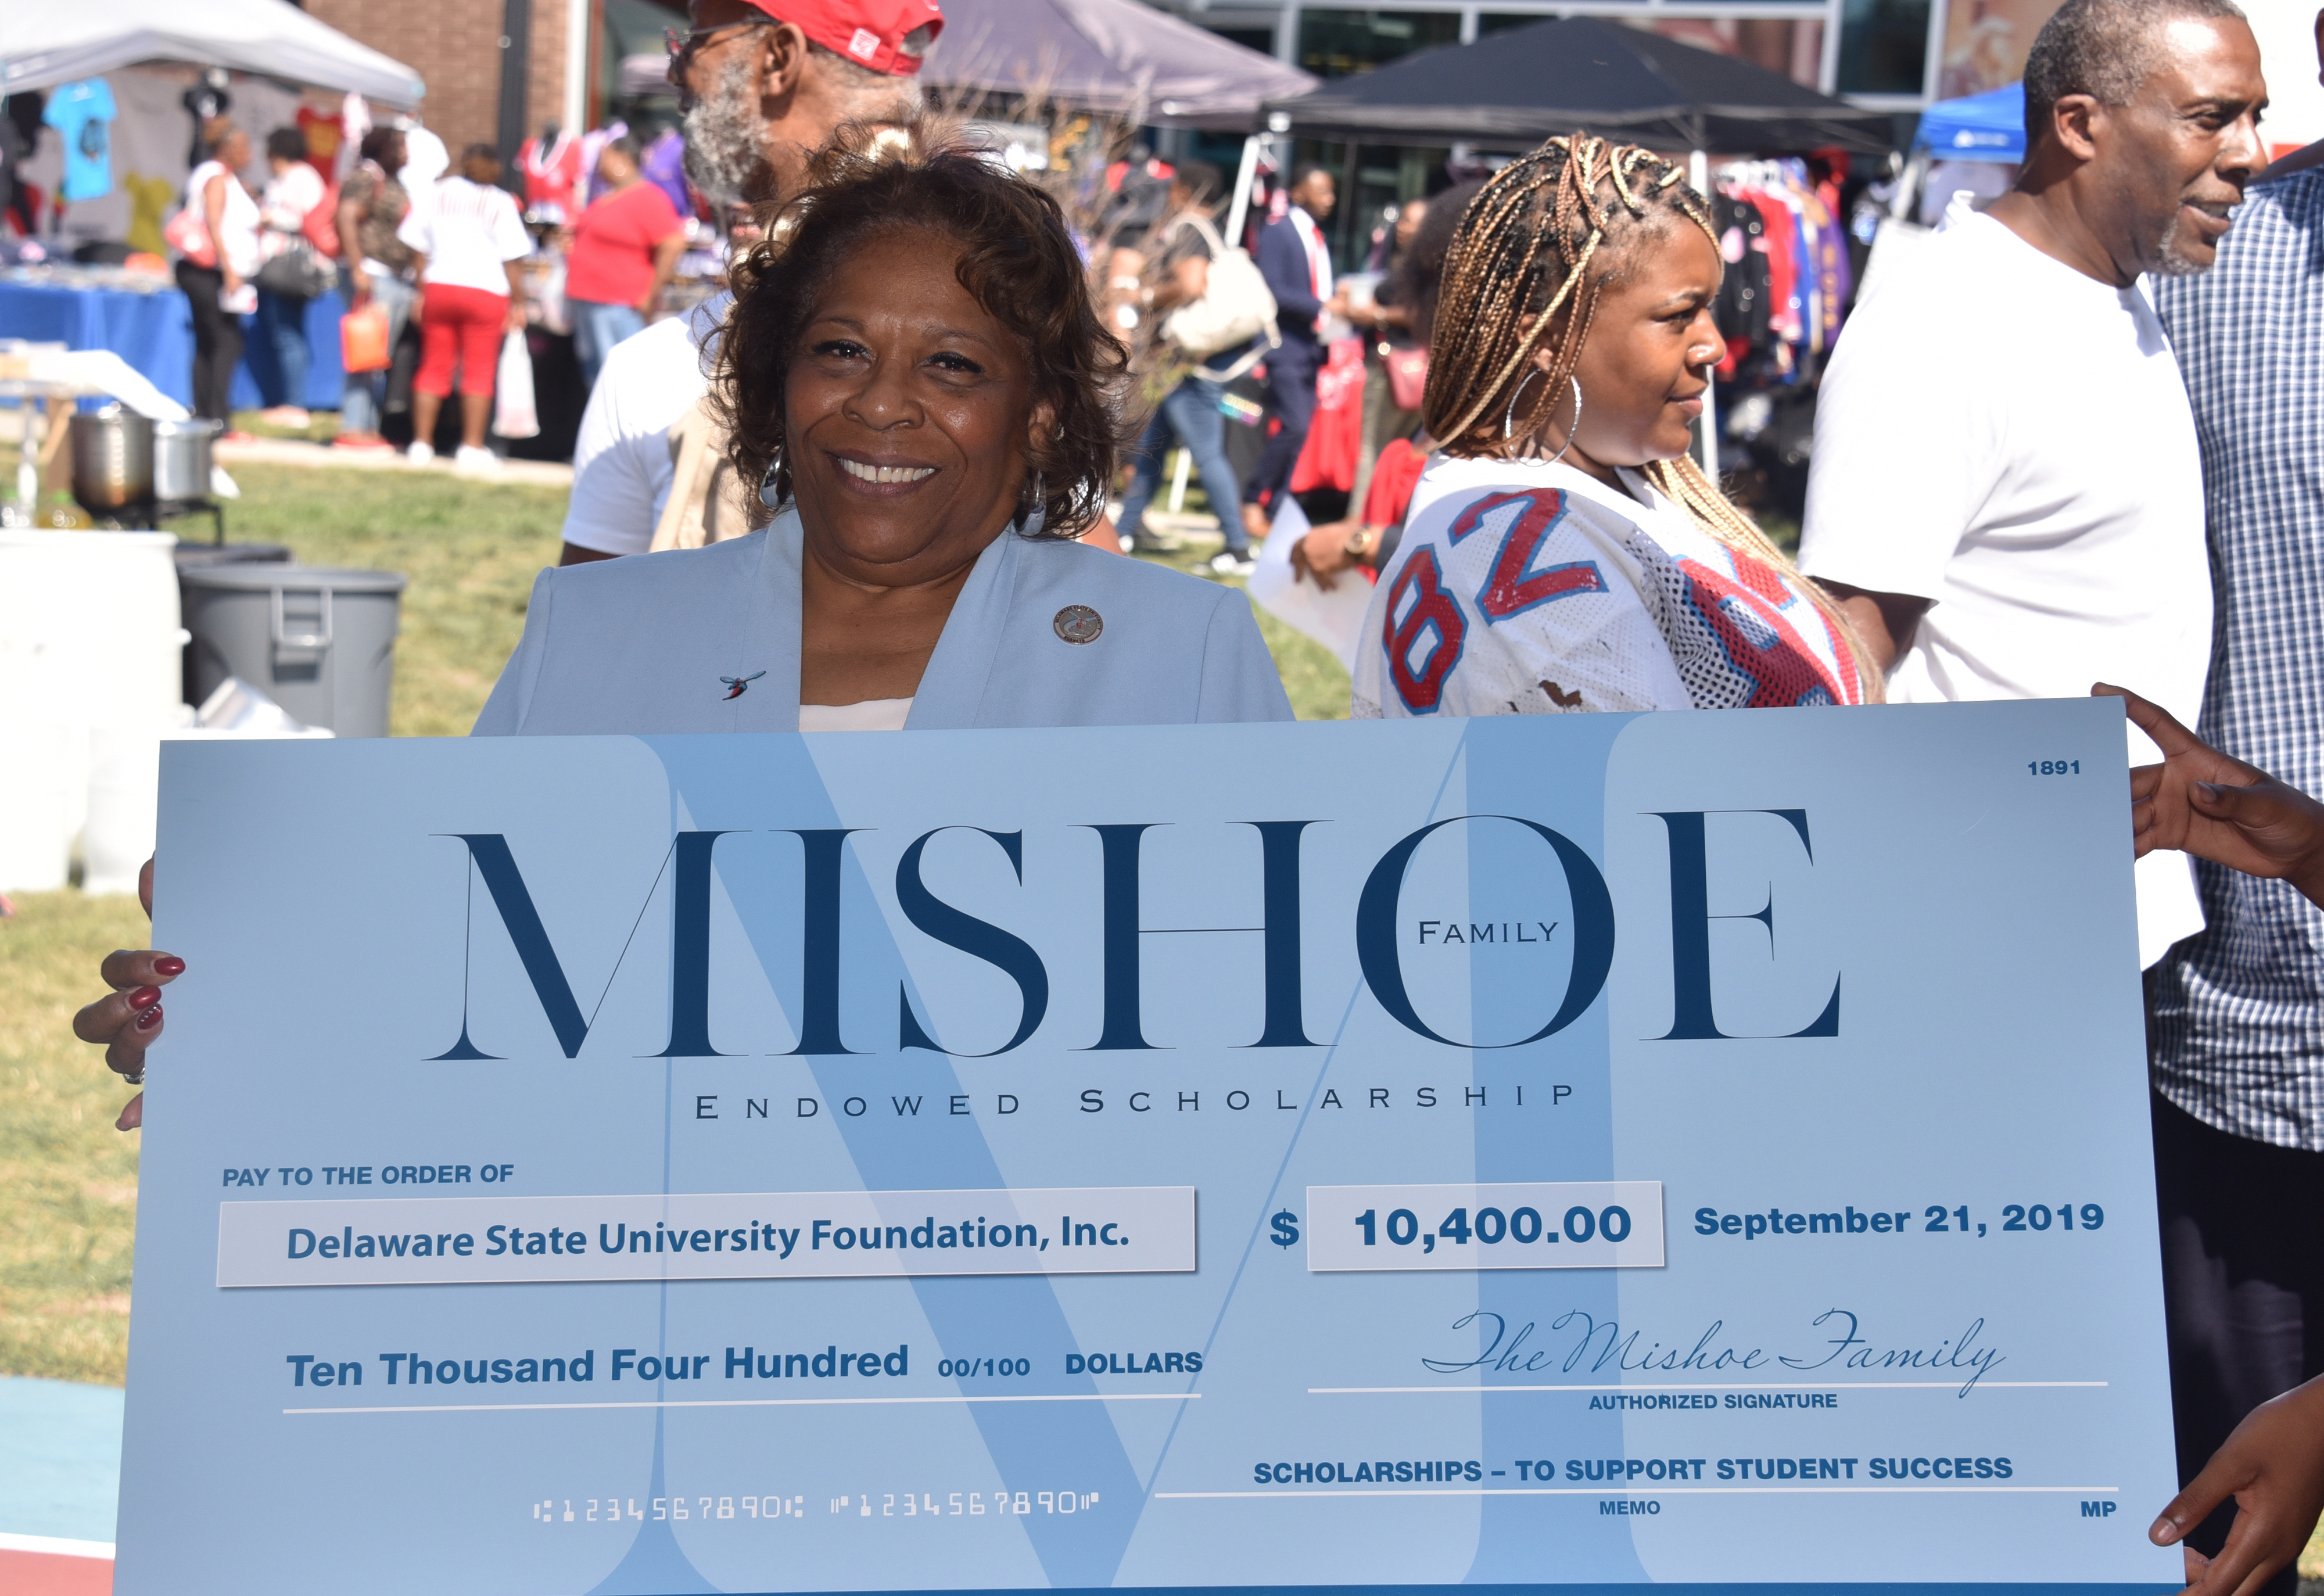 University President Wilma Mishoe holds a display check on behalf of her family that signals the establishment of the Mishoe Endowed Scholarship.